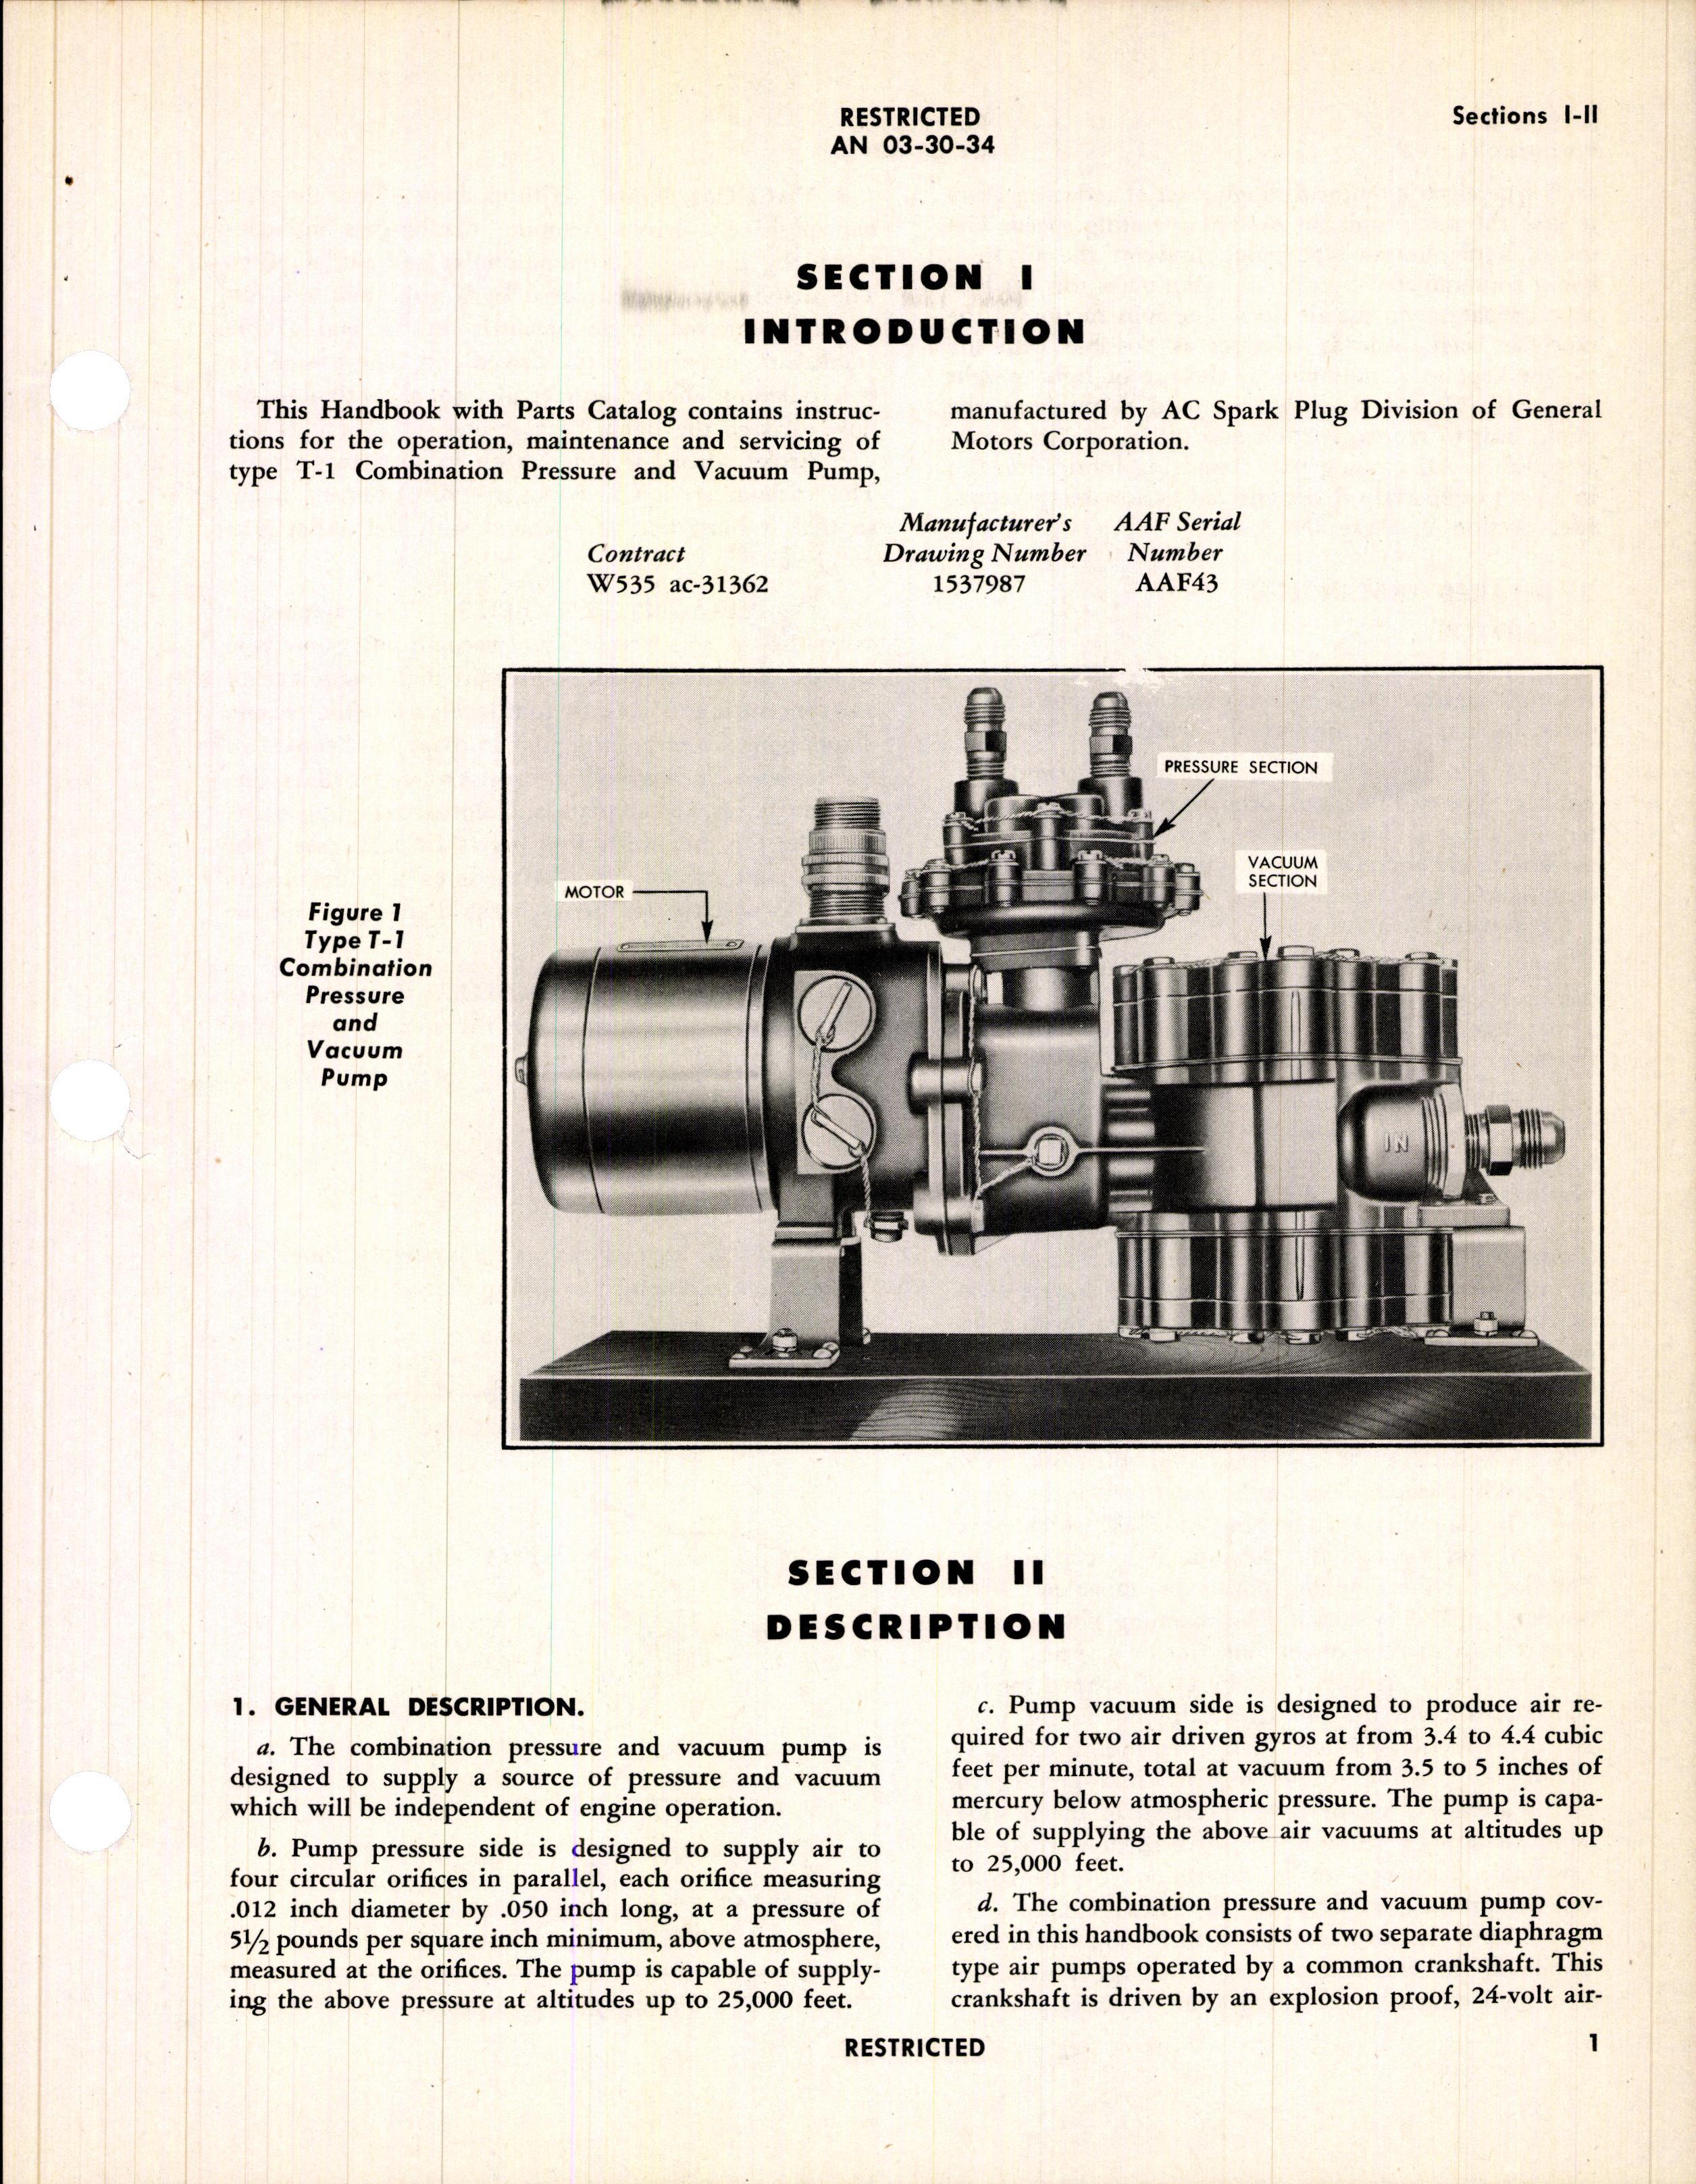 Sample page 5 from AirCorps Library document: Handbook of Instructions with Parts Catalog for Combination Pressure and Vacuum Pump